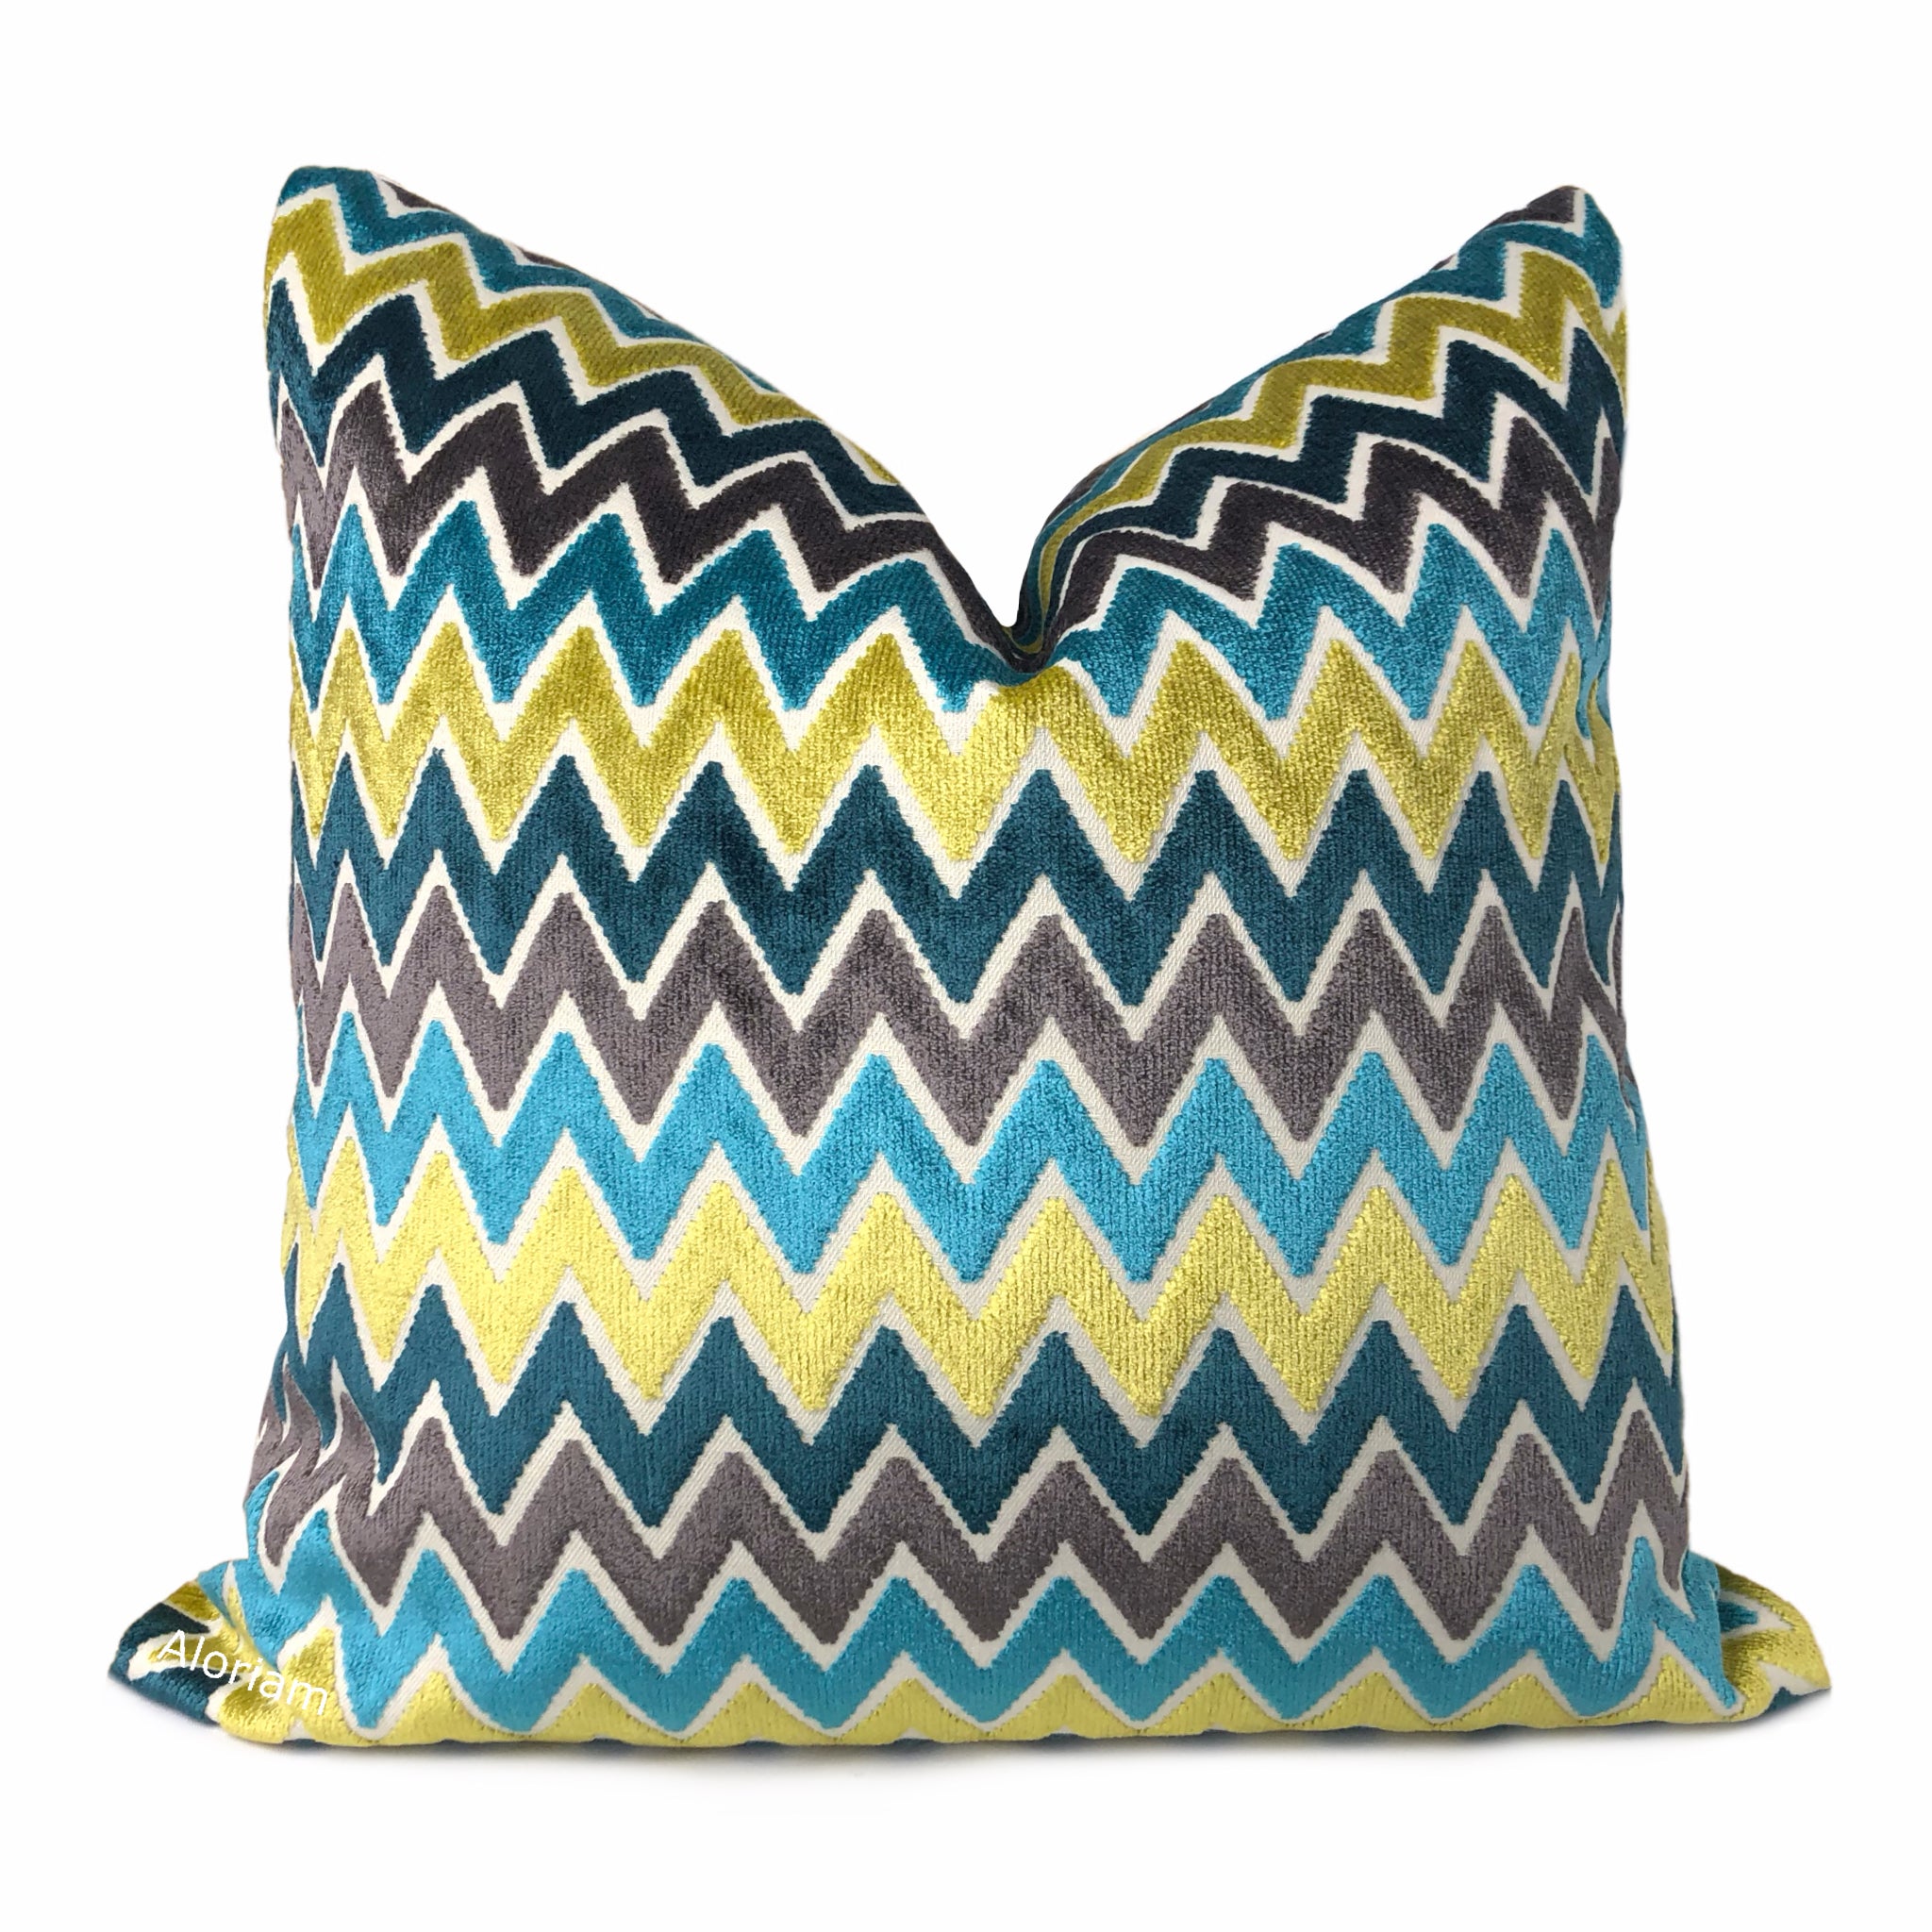 Jeremy Teal Blue Yellow Turquoise Charcoal Chevron Velvet Pillow Cover (Fabric by the Yard available)